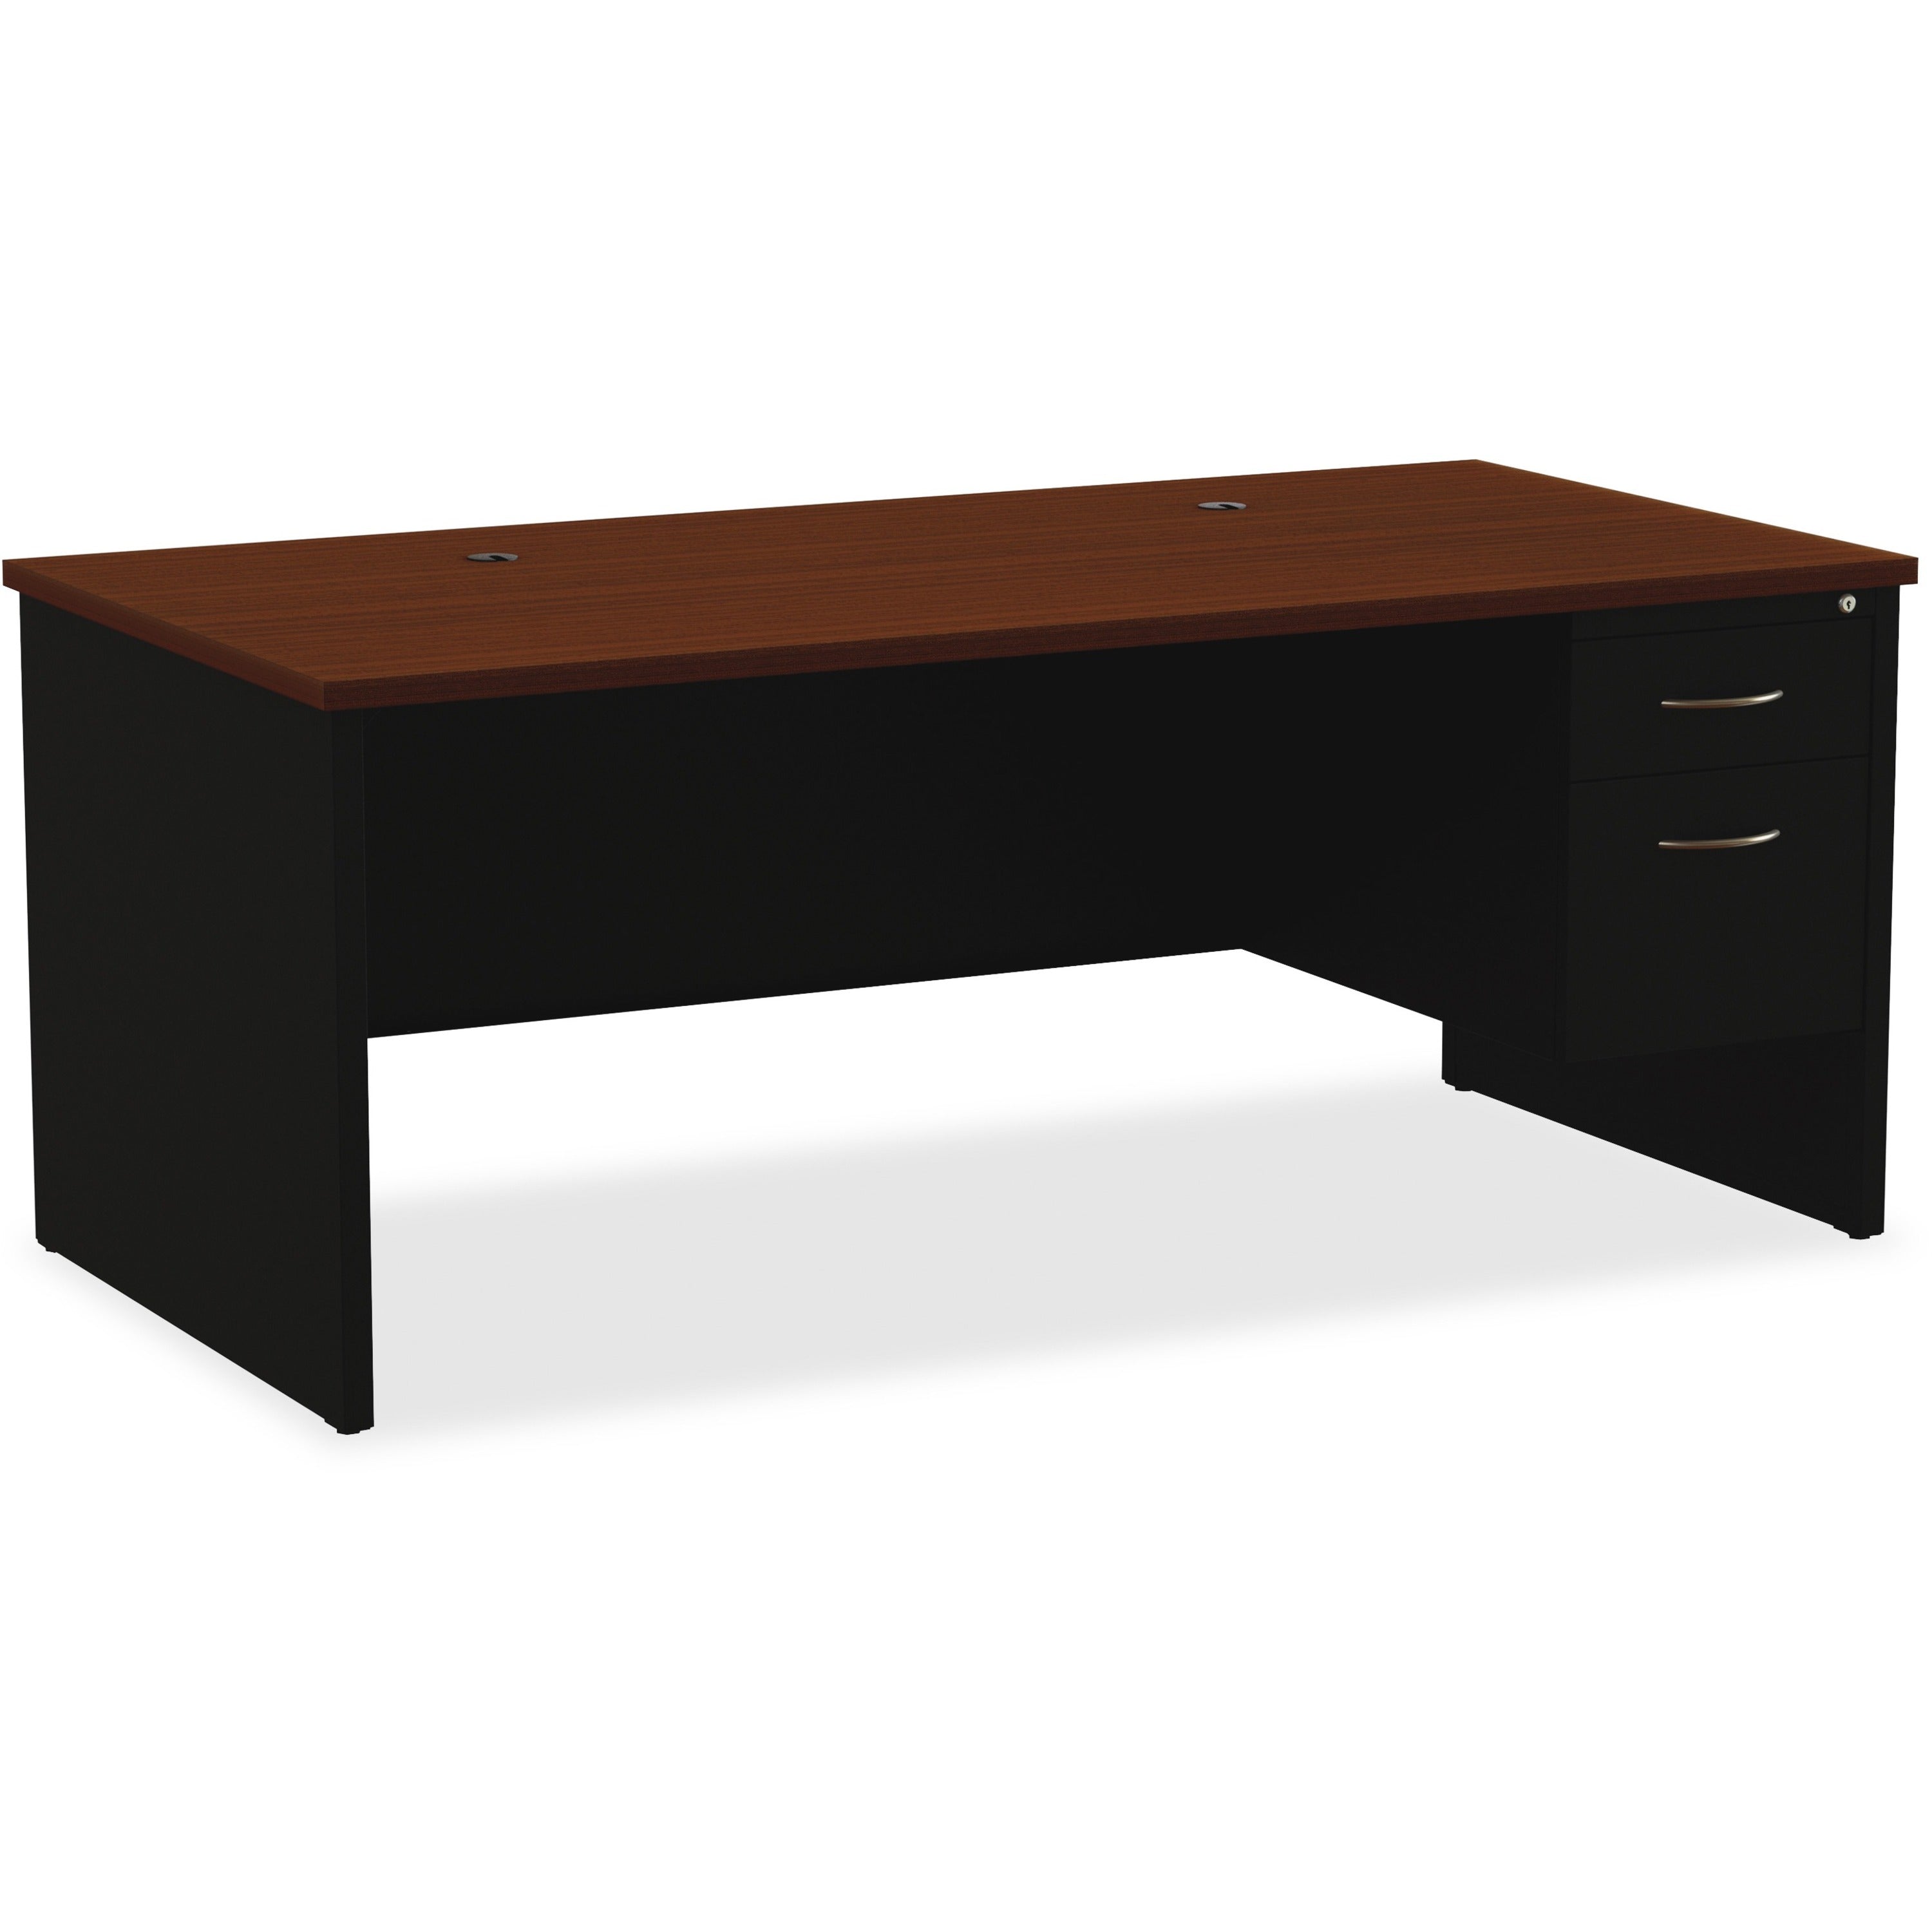 Lorell Fortress Modular Series Right-Pedestal Desk - 72" x 36" , 1.1" Top - 2 x Box, File Drawer(s) - Single Pedestal on Right Side - Material: Steel - Finish: Walnut Laminate, Black - Scratch Resistant, Stain Resistant, Ball-bearing Suspension, Grom - 